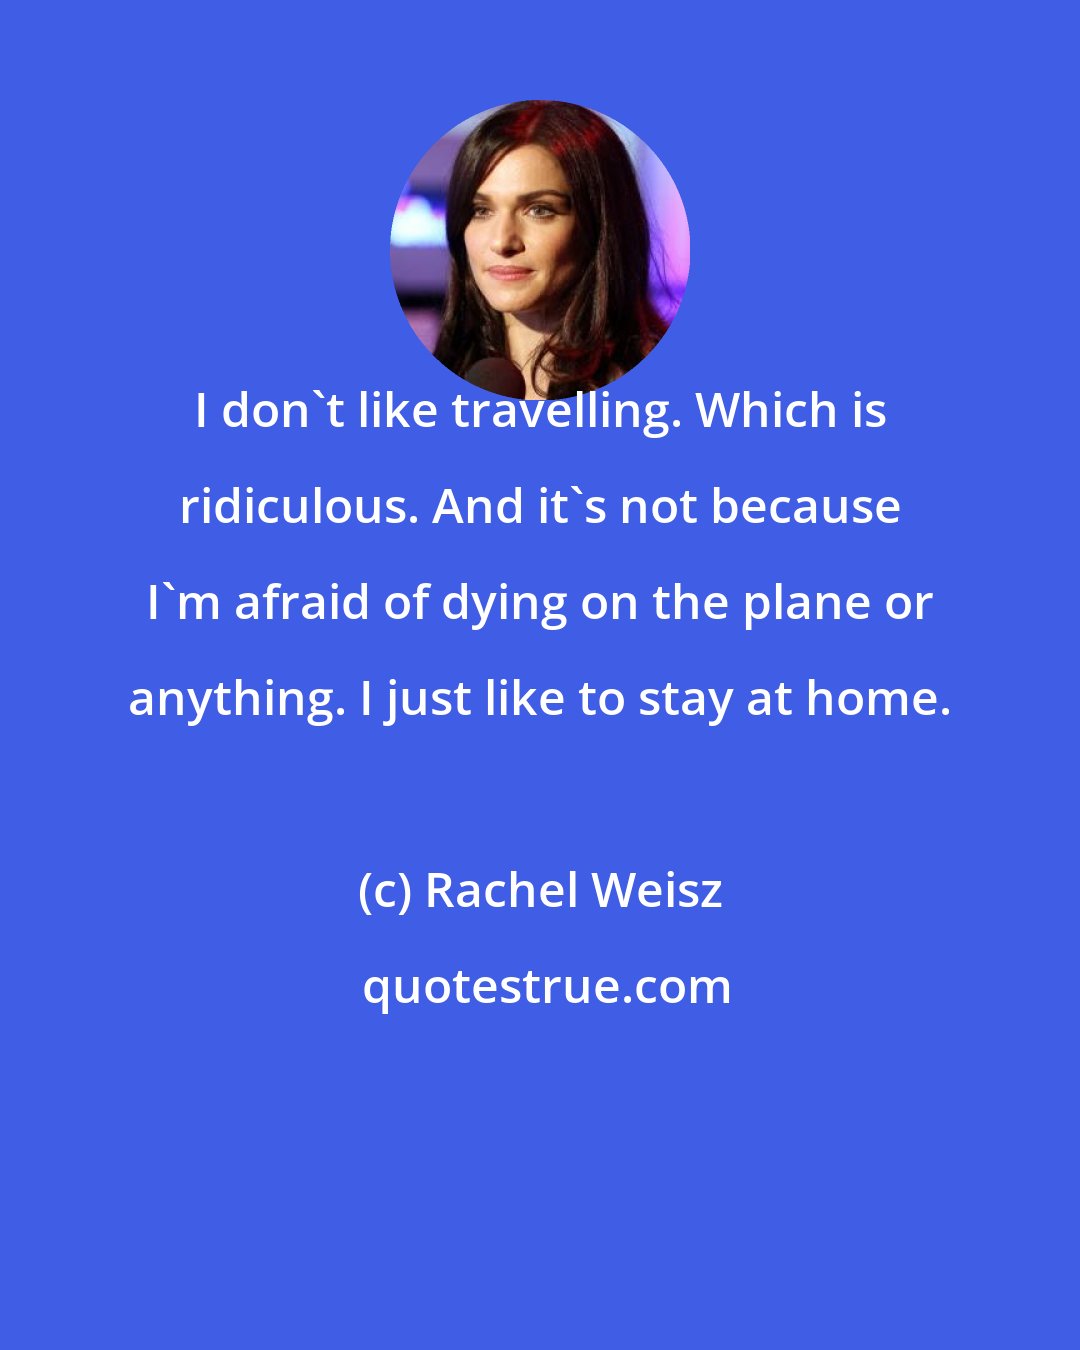 Rachel Weisz: I don't like travelling. Which is ridiculous. And it's not because I'm afraid of dying on the plane or anything. I just like to stay at home.